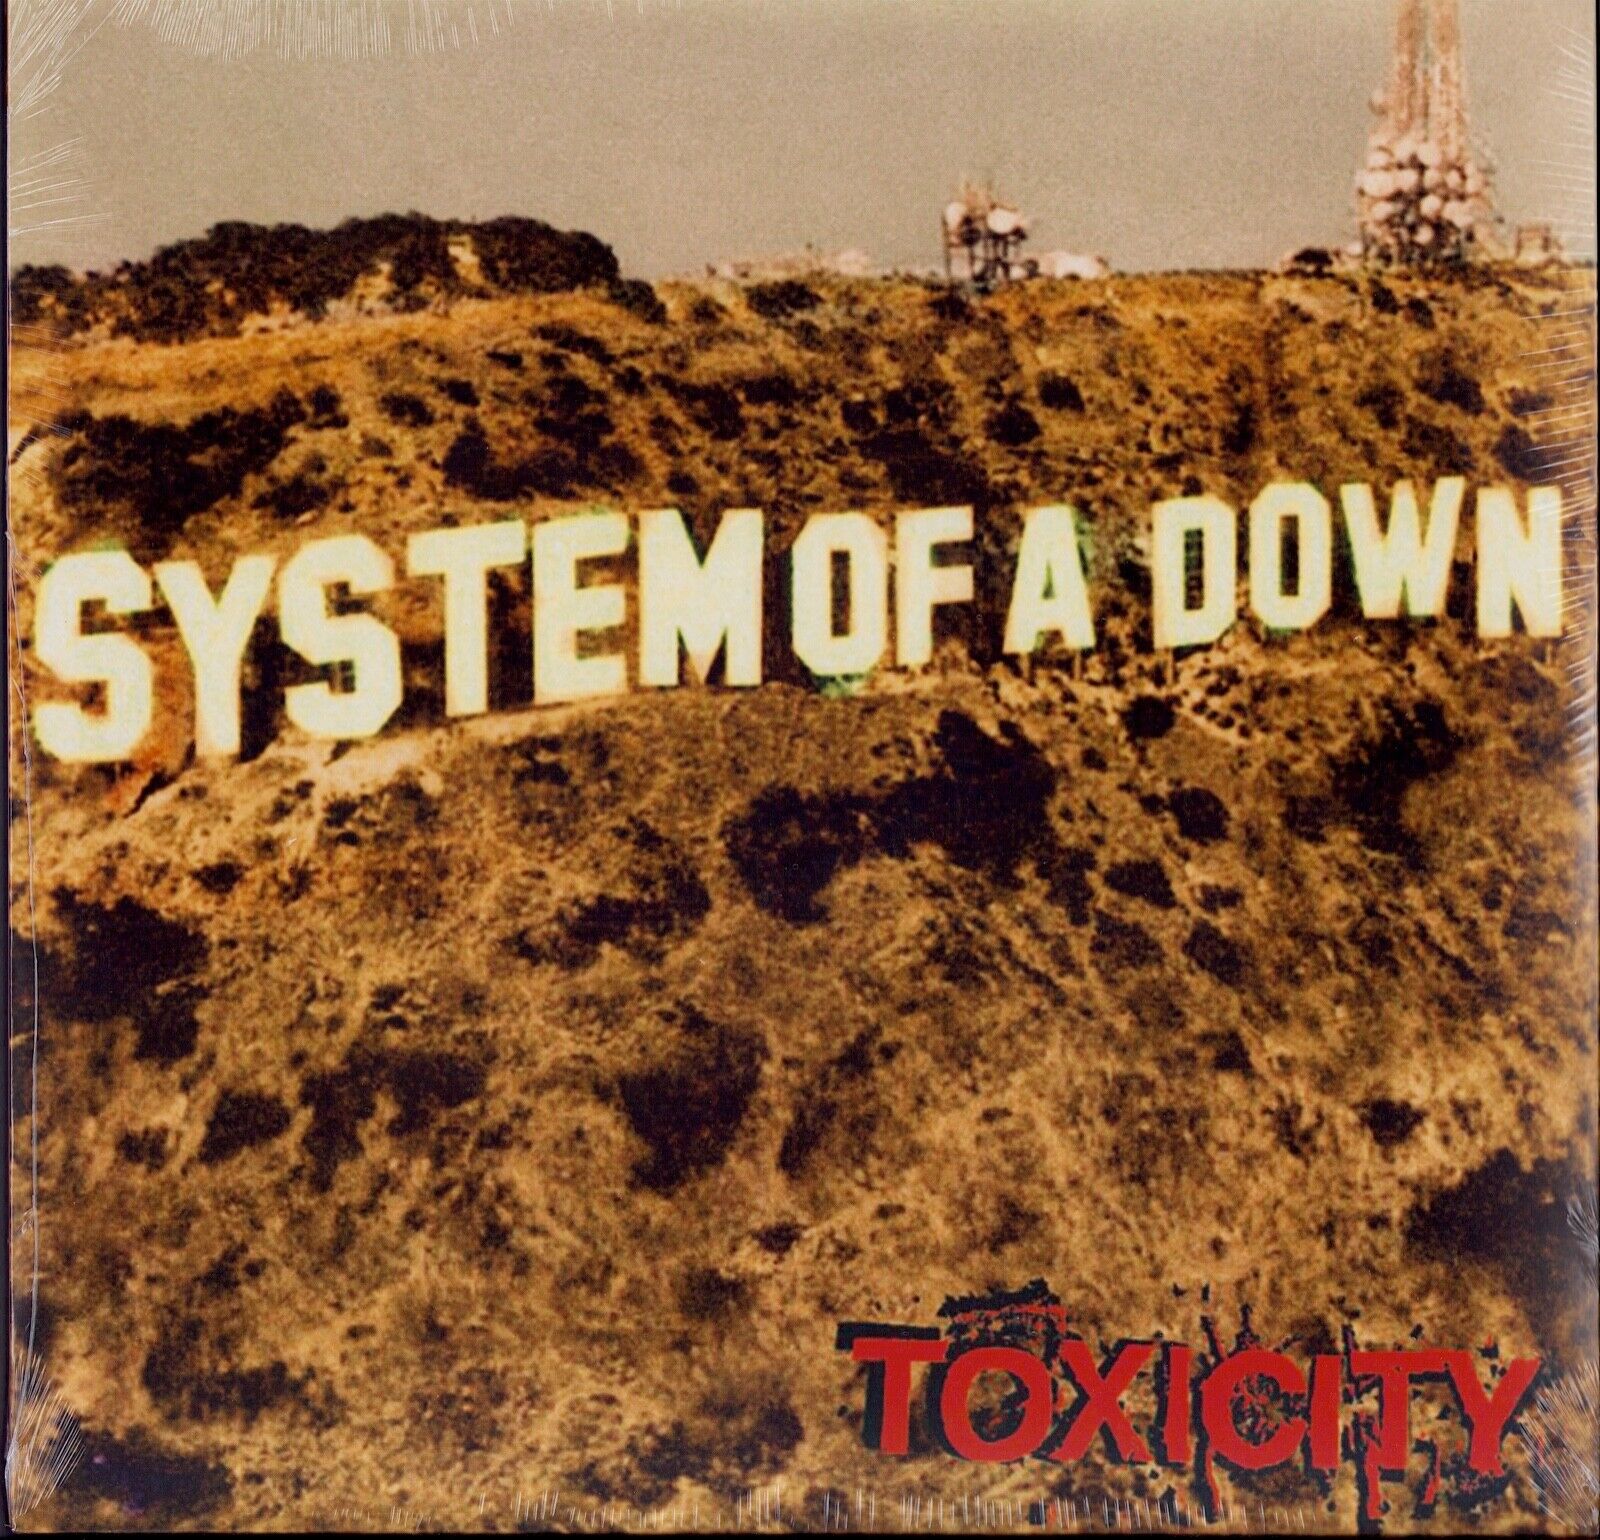 System Of A Down ‎- Toxicity (Vinyl LP)